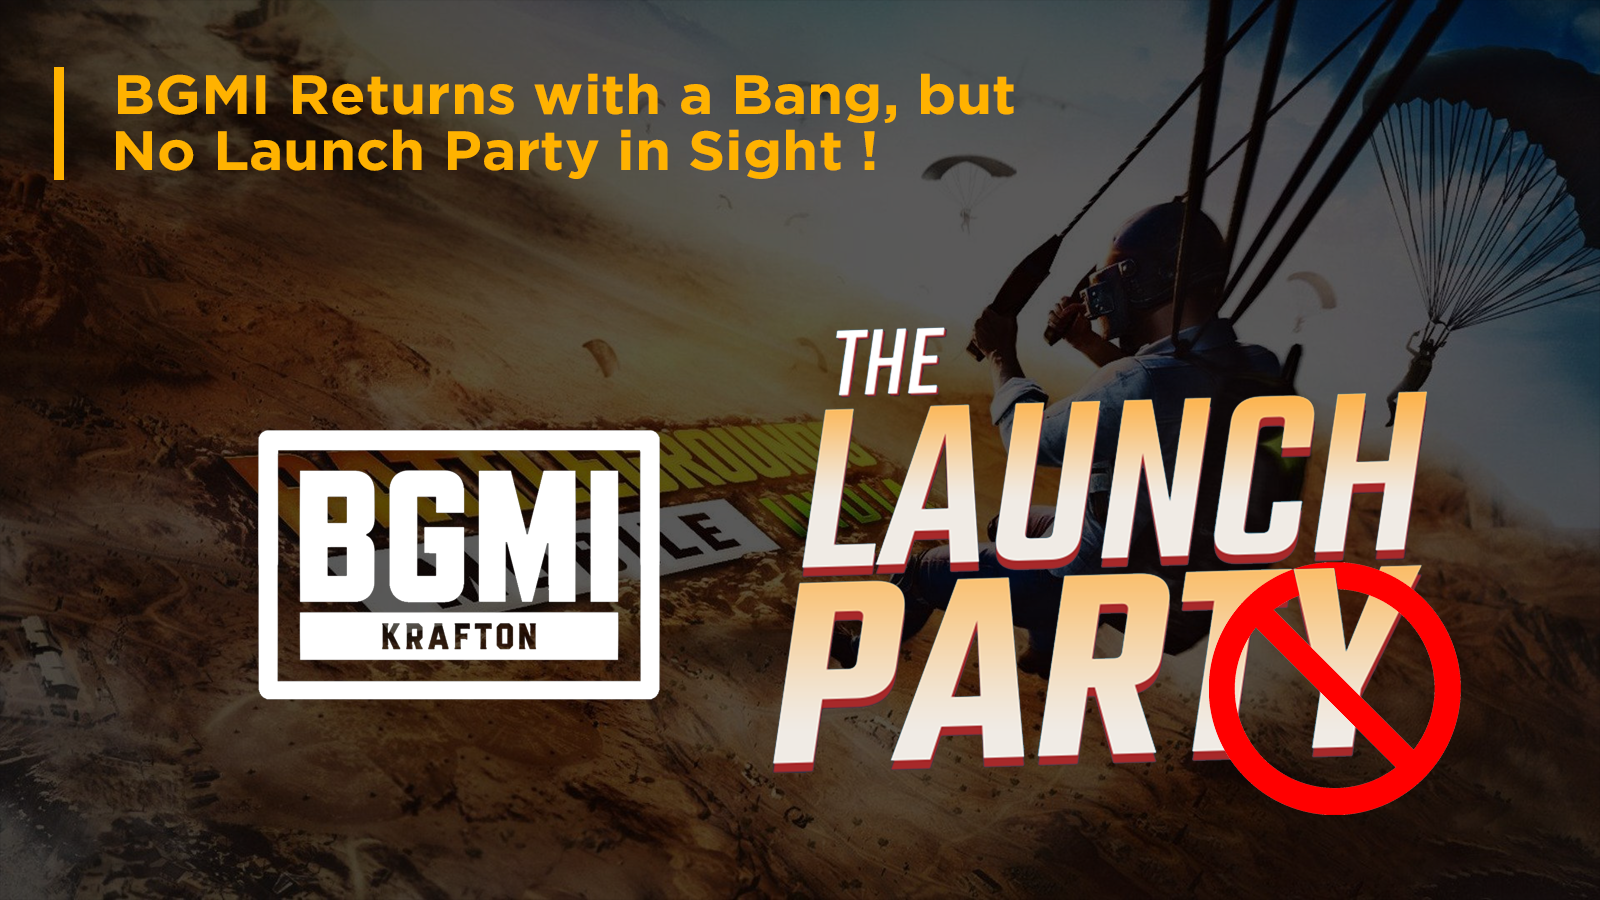 BGMI Unban News: Mazy’s Revelation Unveiled as BGMI Returns with a Bang, but No Launch Party in Sight!